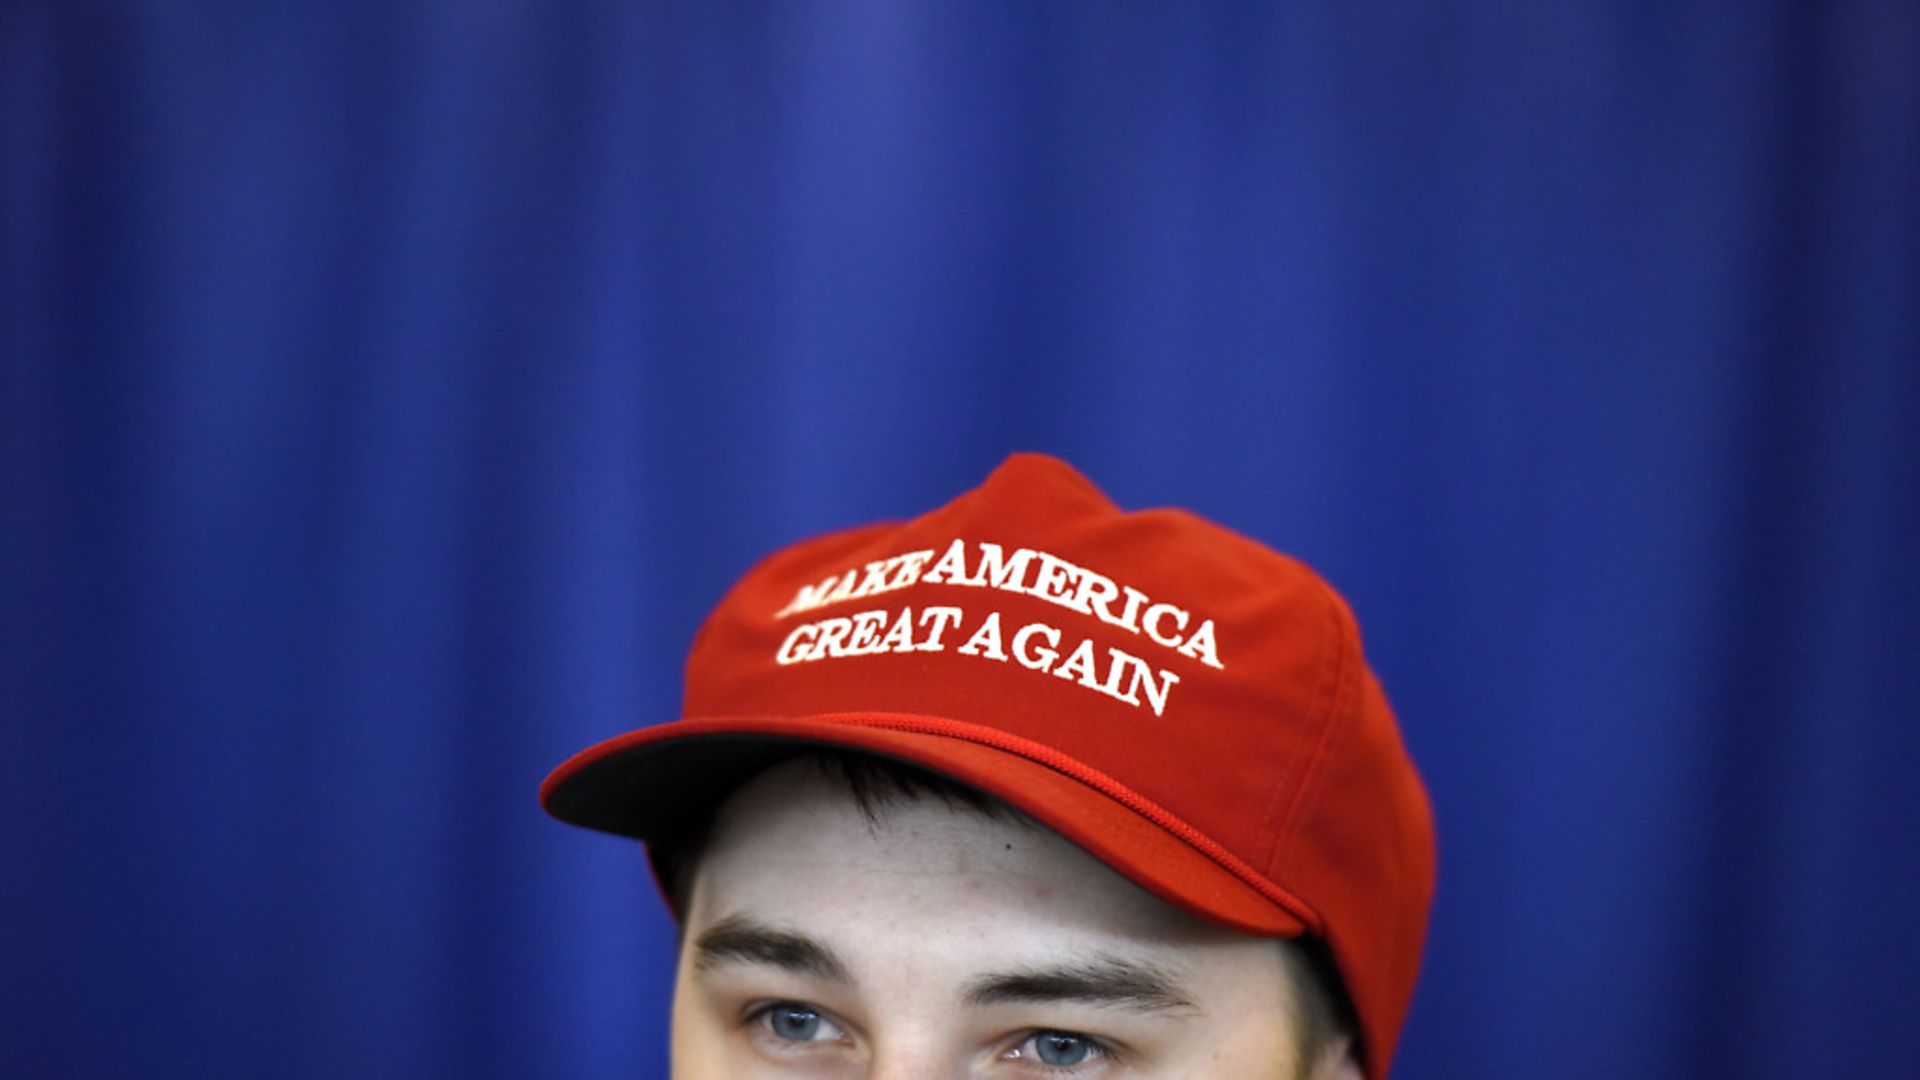 Matt Atkins wears a Make America Great Again hat as he attends the Manning Centre conference on Friday, Feb. 24, 2017 in Ottawa. THE CANADIAN PRESS/Justin Tang - Credit: The Canadian Press/PA Images